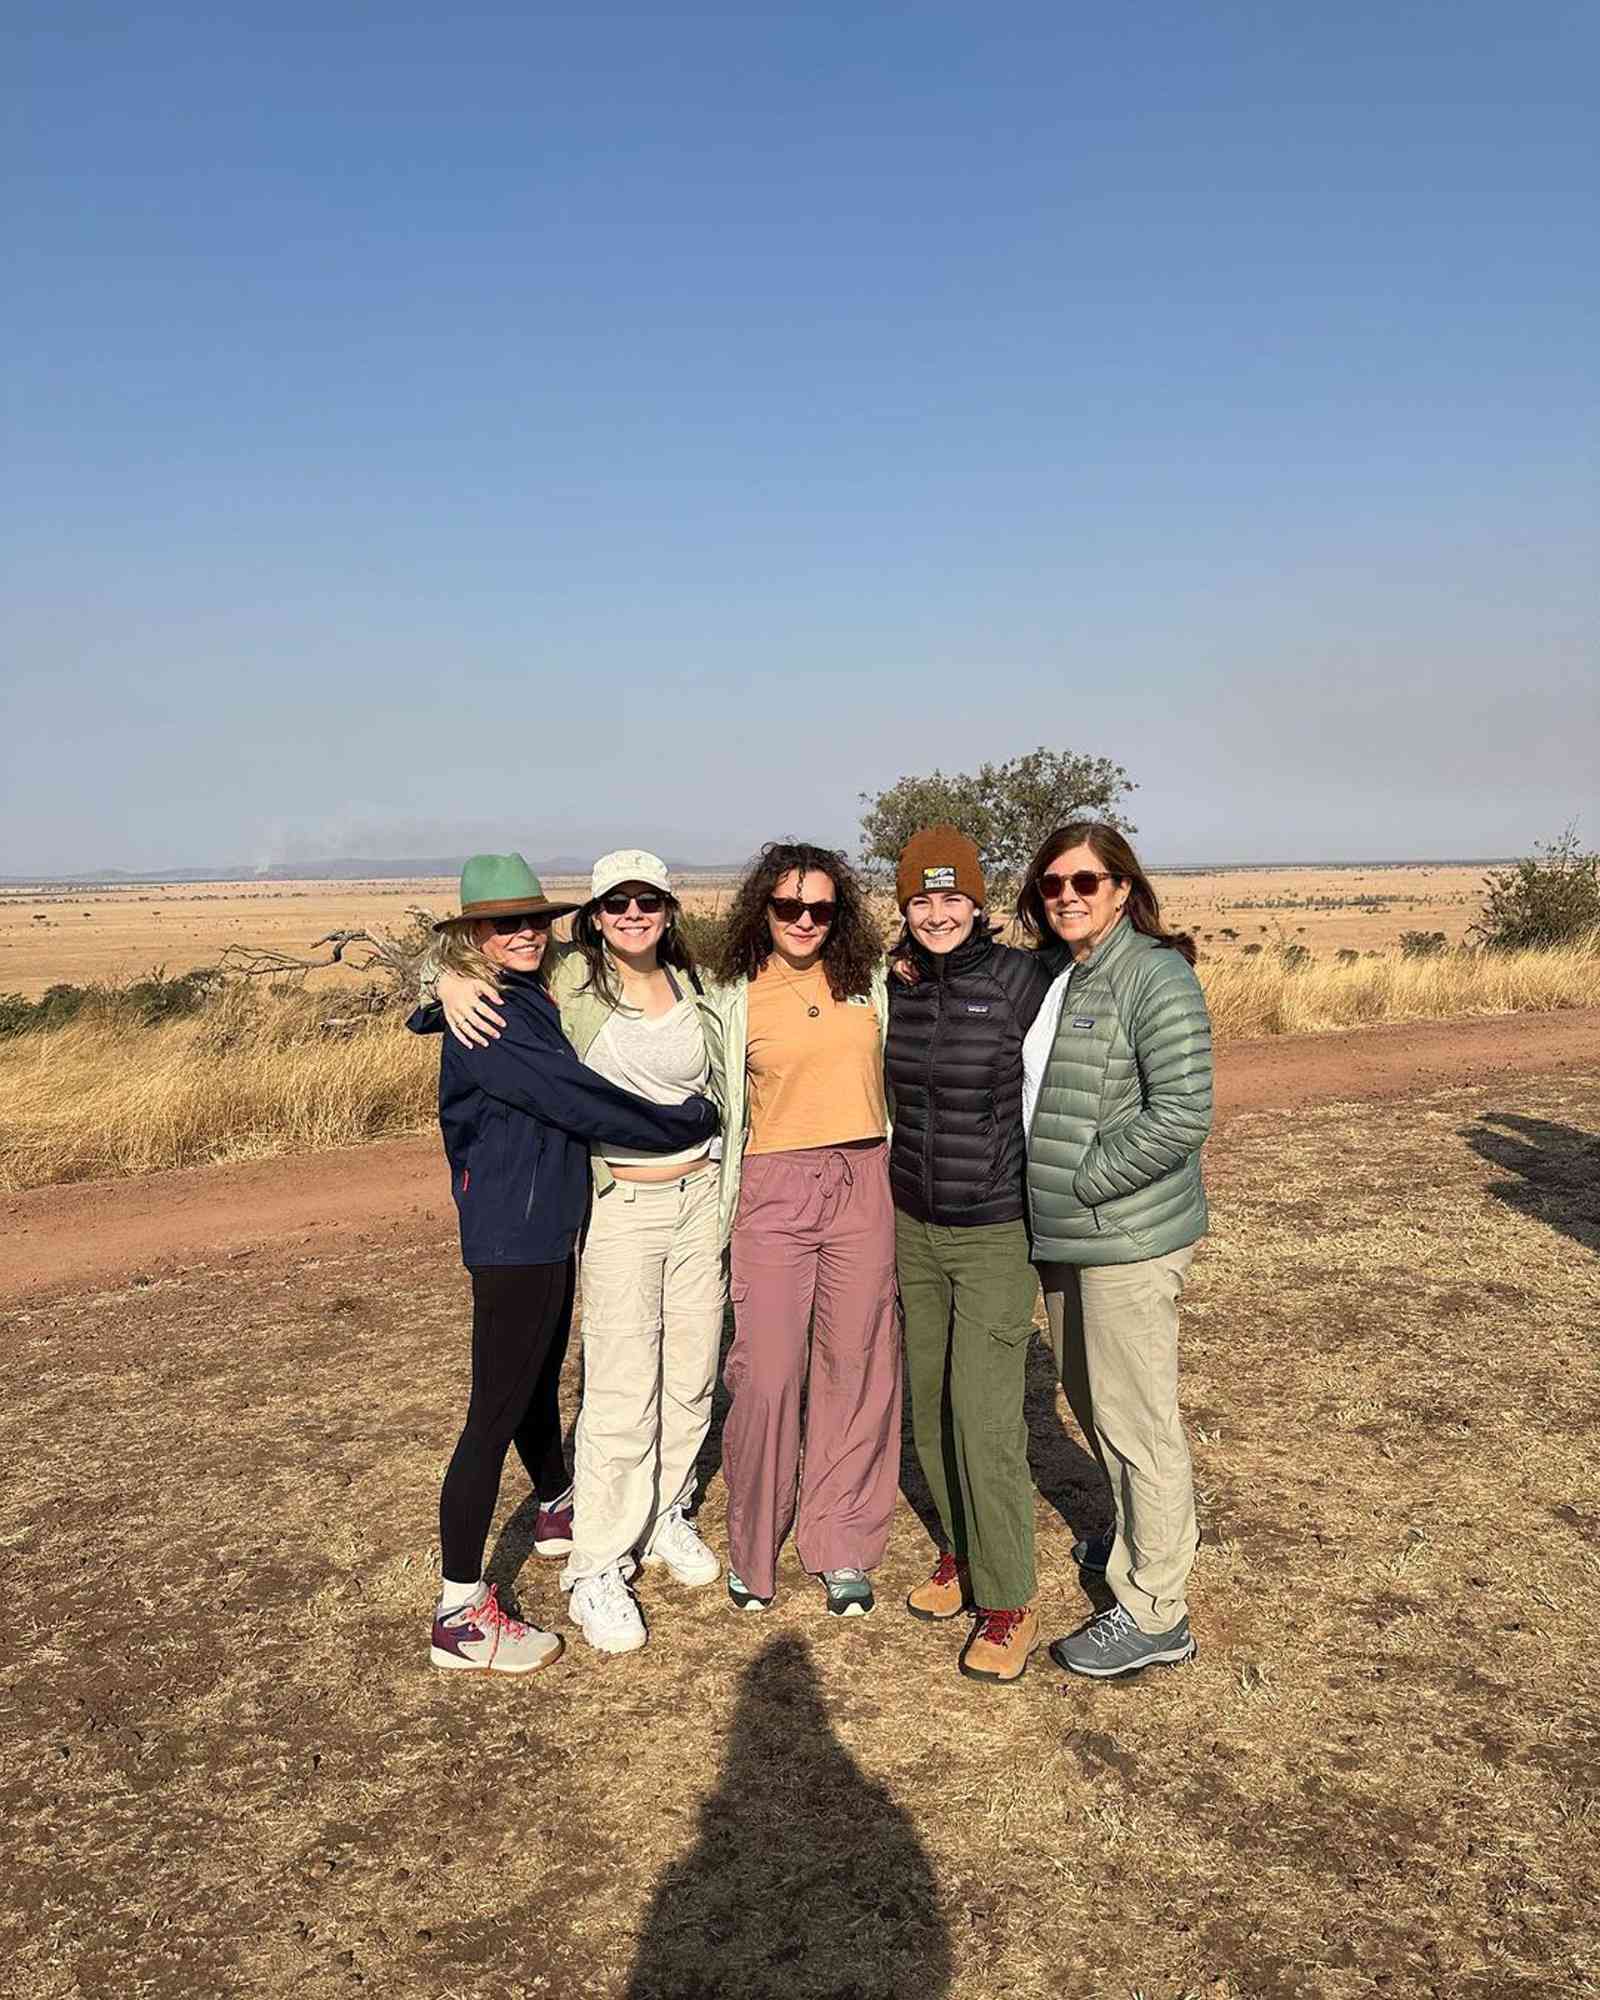 Chelsea Handler with her sister Simone and her kids in Tanzania, Africa.